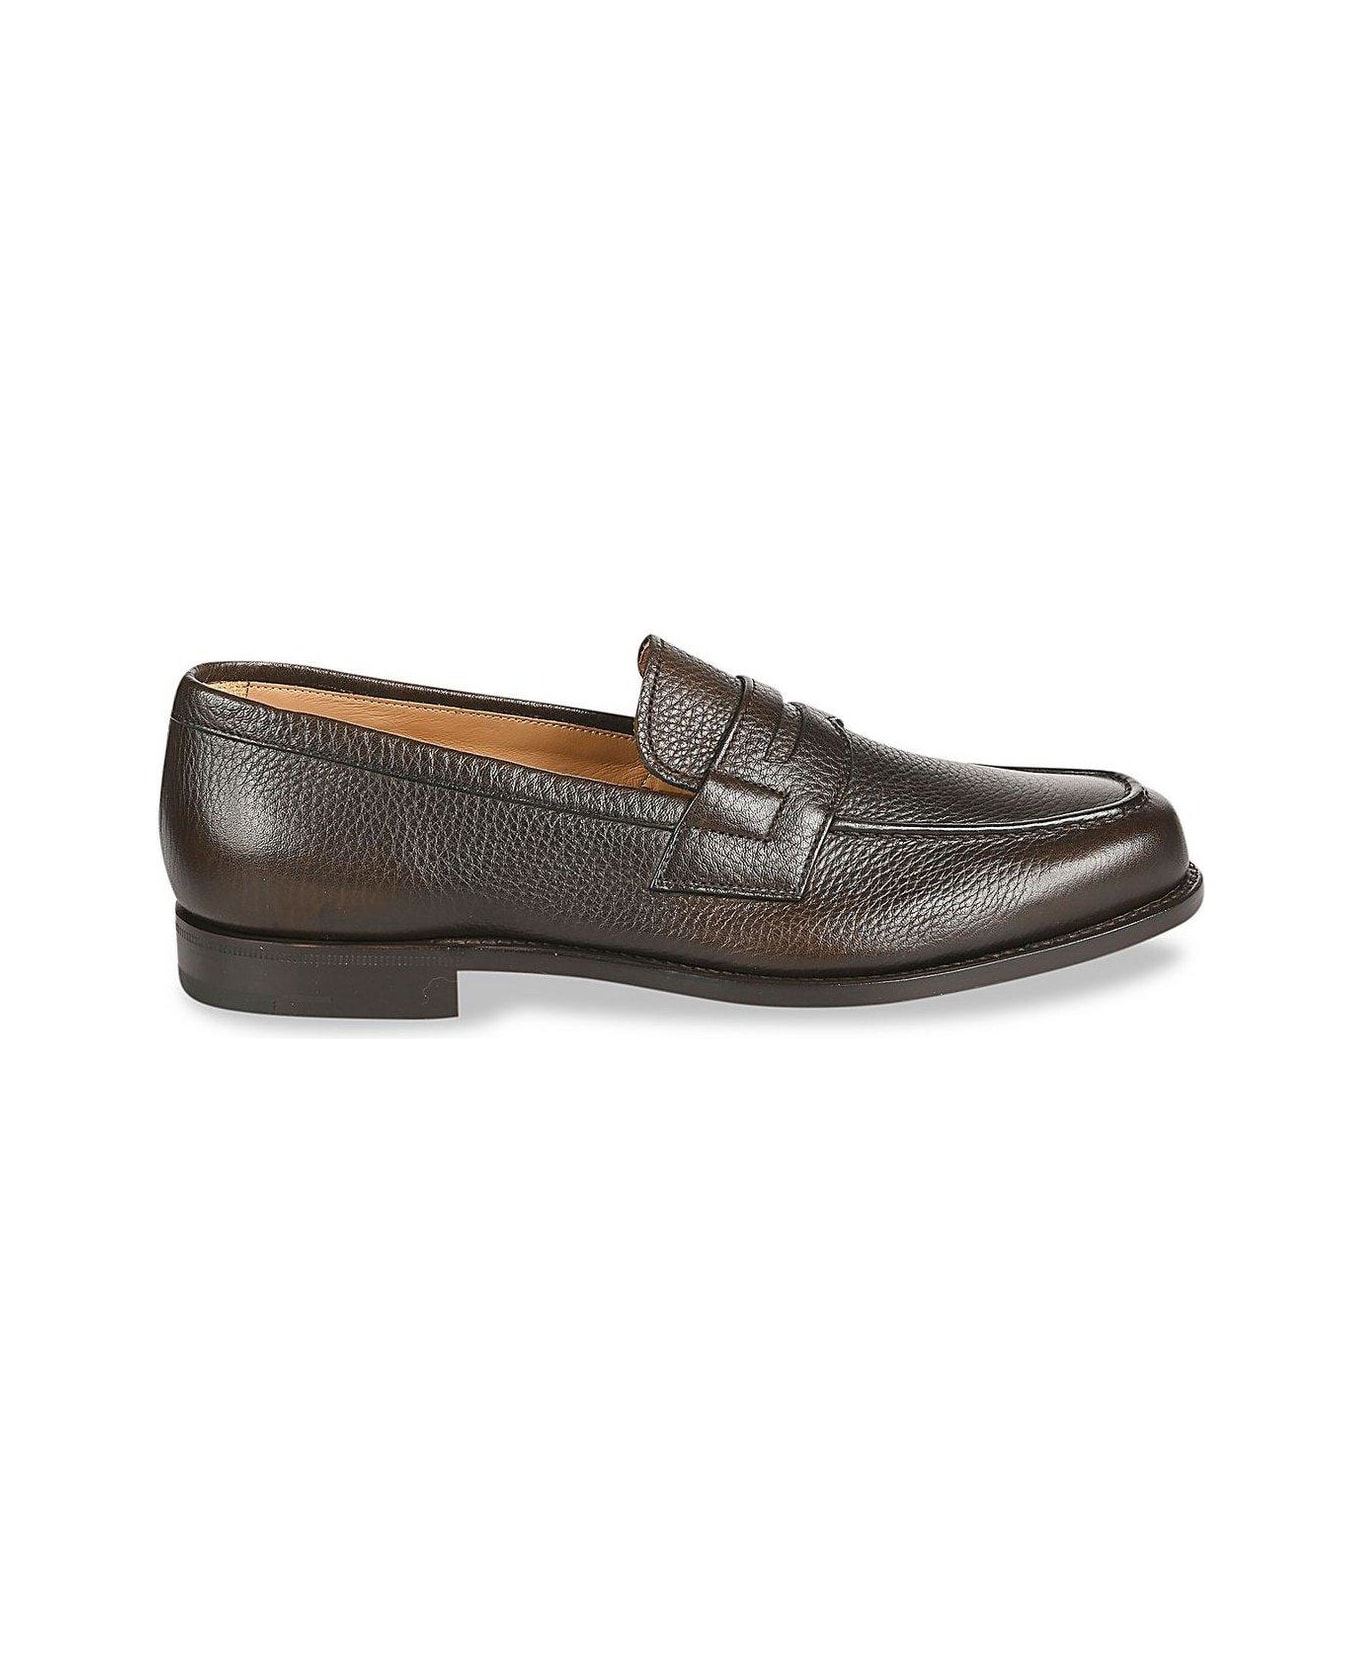 Church's Heswall Slip-on Loafers - Marrone scuro ローファー＆デッキシューズ